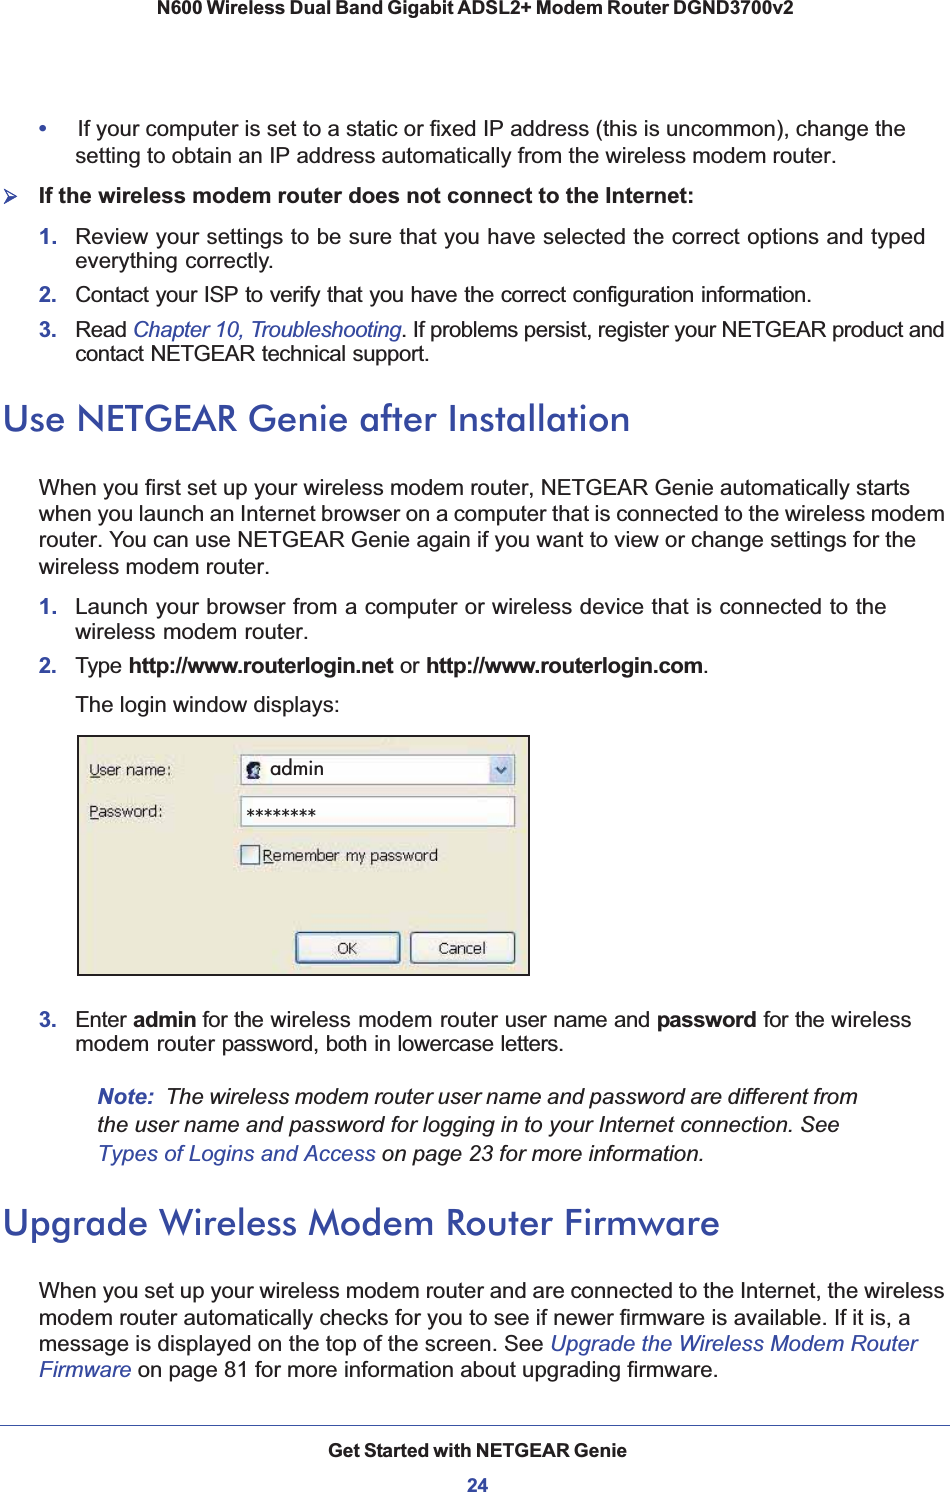 Get Started with NETGEAR Genie24N600 Wireless Dual Band Gigabit ADSL2+ Modem Router DGND3700v2 •If your computer is set to a static or fixed IP address (this is uncommon), change the setting to obtain an IP address automatically from the wireless modem router.¾If the wireless modem router does not connect to the Internet:1. Review your settings to be sure that you have selected the correct options and typed everything correctly. 2.  Contact your ISP to verify that you have the correct configuration information.3.  Read Chapter 10, Troubleshooting. If problems persist, register your NETGEAR product and contact NETGEAR technical support.Use NETGEAR Genie after InstallationWhen you first set up your wireless modem router, NETGEAR Genie automatically starts when you launch an Internet browser on a computer that is connected to the wireless modem router. You can use NETGEAR Genie again if you want to view or change settings for the wireless modem router.1. Launch your browser from a computer or wireless device that is connected to the wireless modem router.2.  Type http://www.routerlogin.net or http://www.routerlogin.com.The login window displays:admin********3.  Enter admin for the wireless modem router user name and password for the wireless modem router password, both in lowercase letters. Note: The wireless modem router user name and password are different from the user name and password for logging in to your Internet connection. See Types of Logins and Access on page 23 for more information.Upgrade Wireless Modem Router FirmwareWhen you set up your wireless modem router and are connected to the Internet, the wireless modem router automatically checks for you to see if newer firmware is available. If it is, a message is displayed on the top of the screen. See Upgrade the Wireless Modem Router Firmware on page 81 for more information about upgrading firmware.